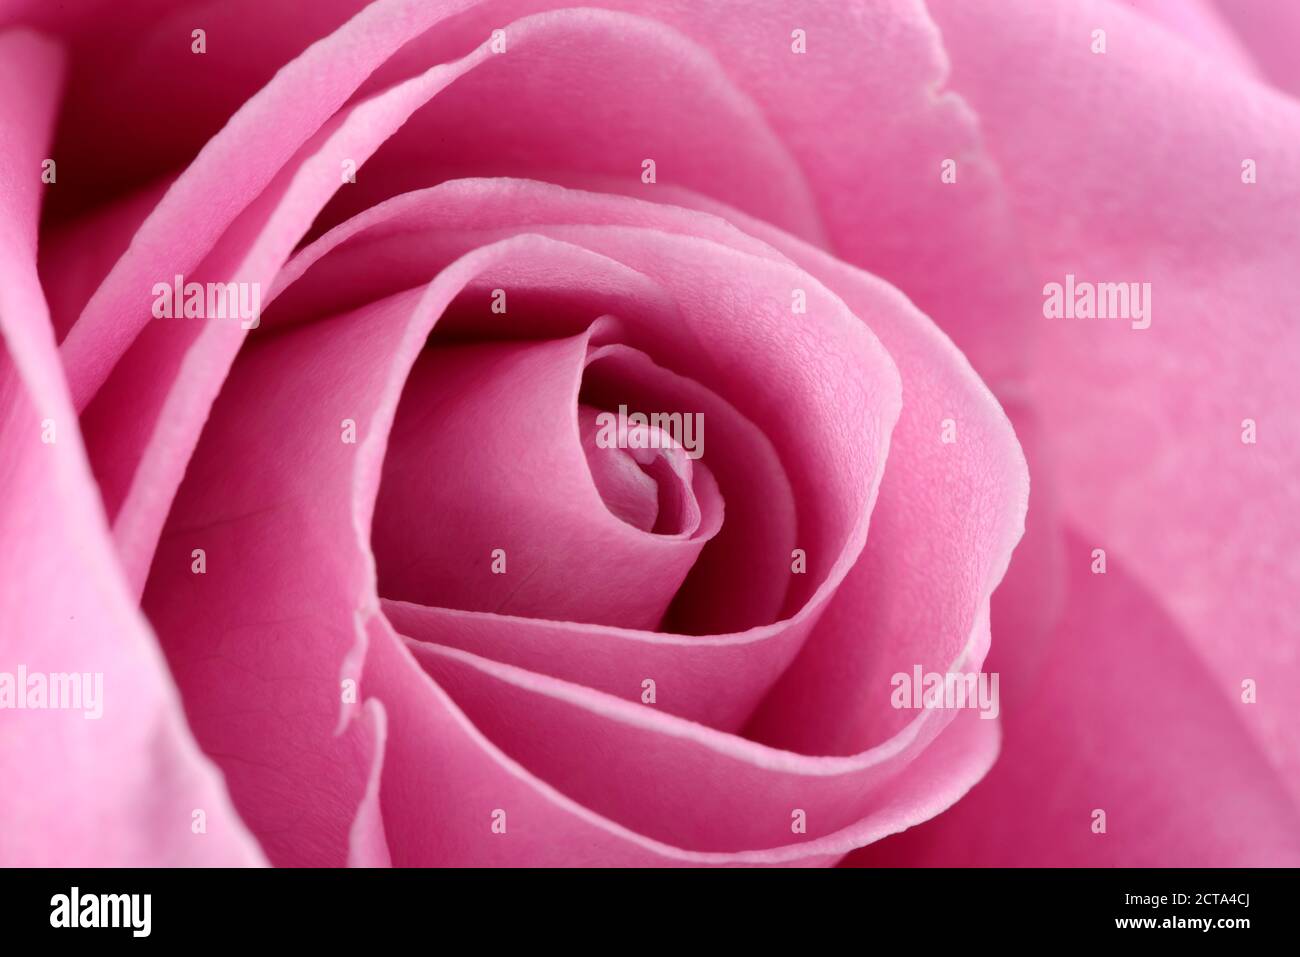 Blossom of pink rose, Rosa, partial view Stock Photo